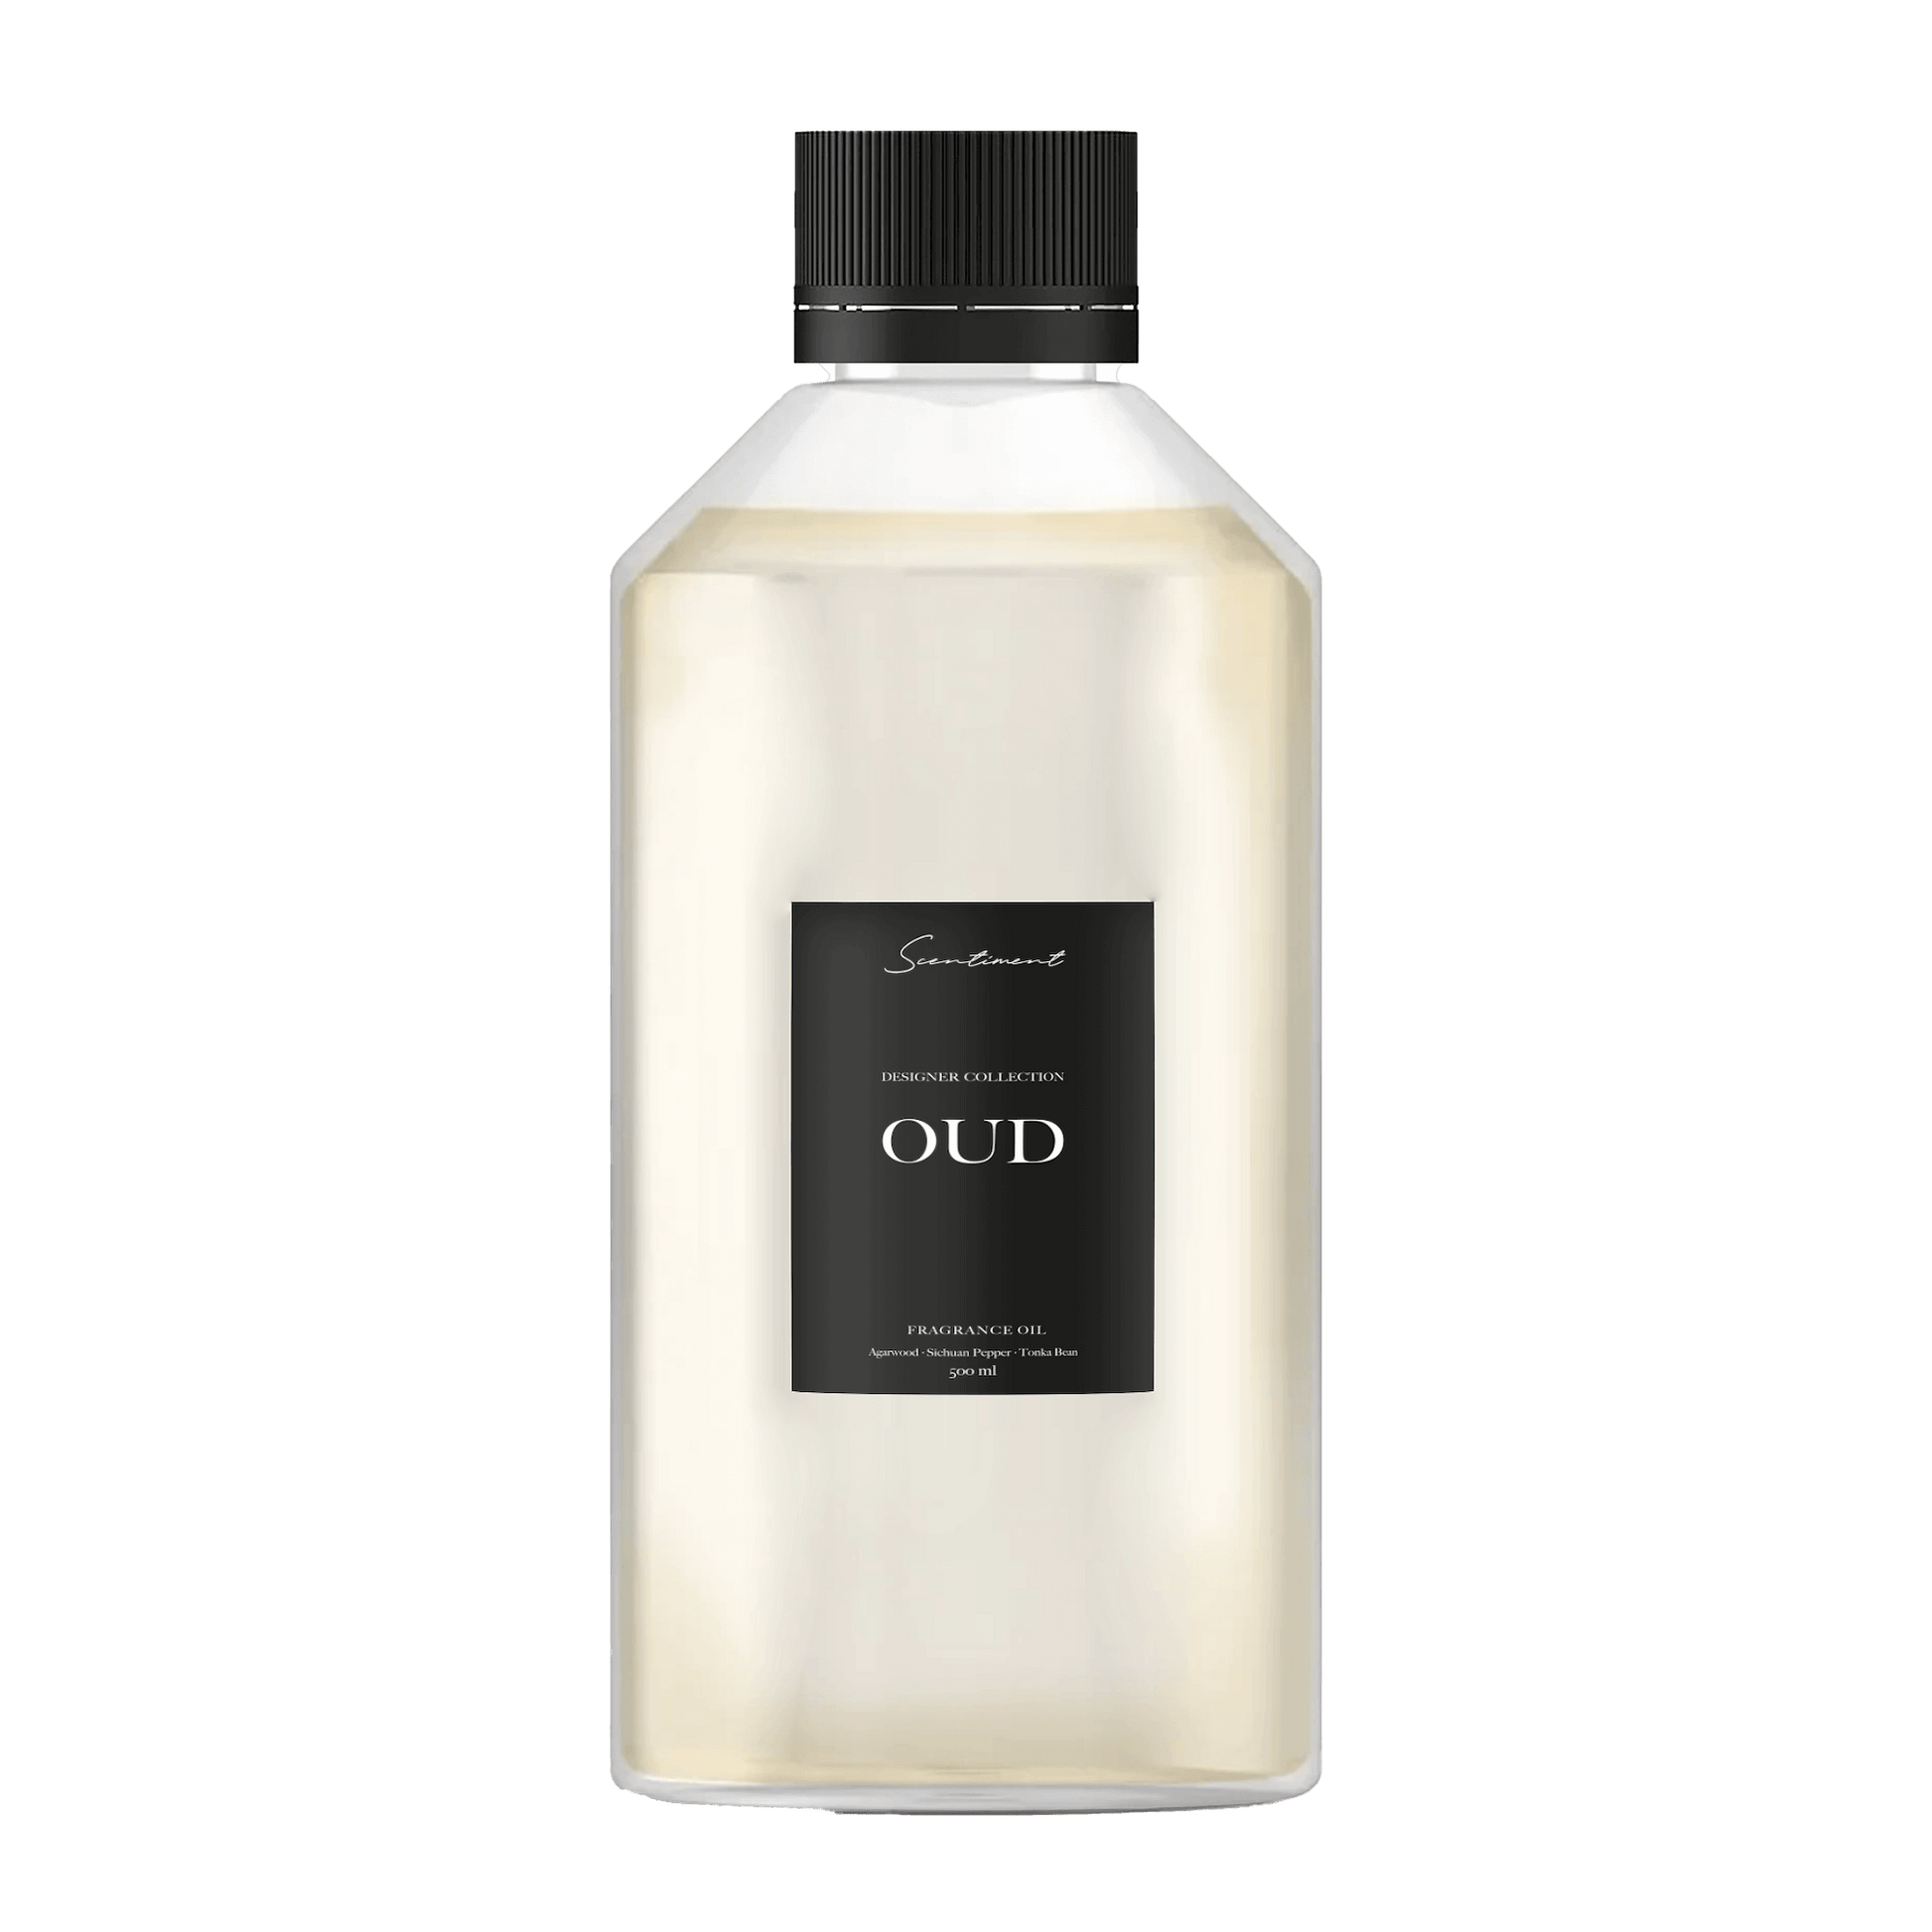 Oud 500ml Fragrance Oil, Inspired by Tom Ford® Oud Wood